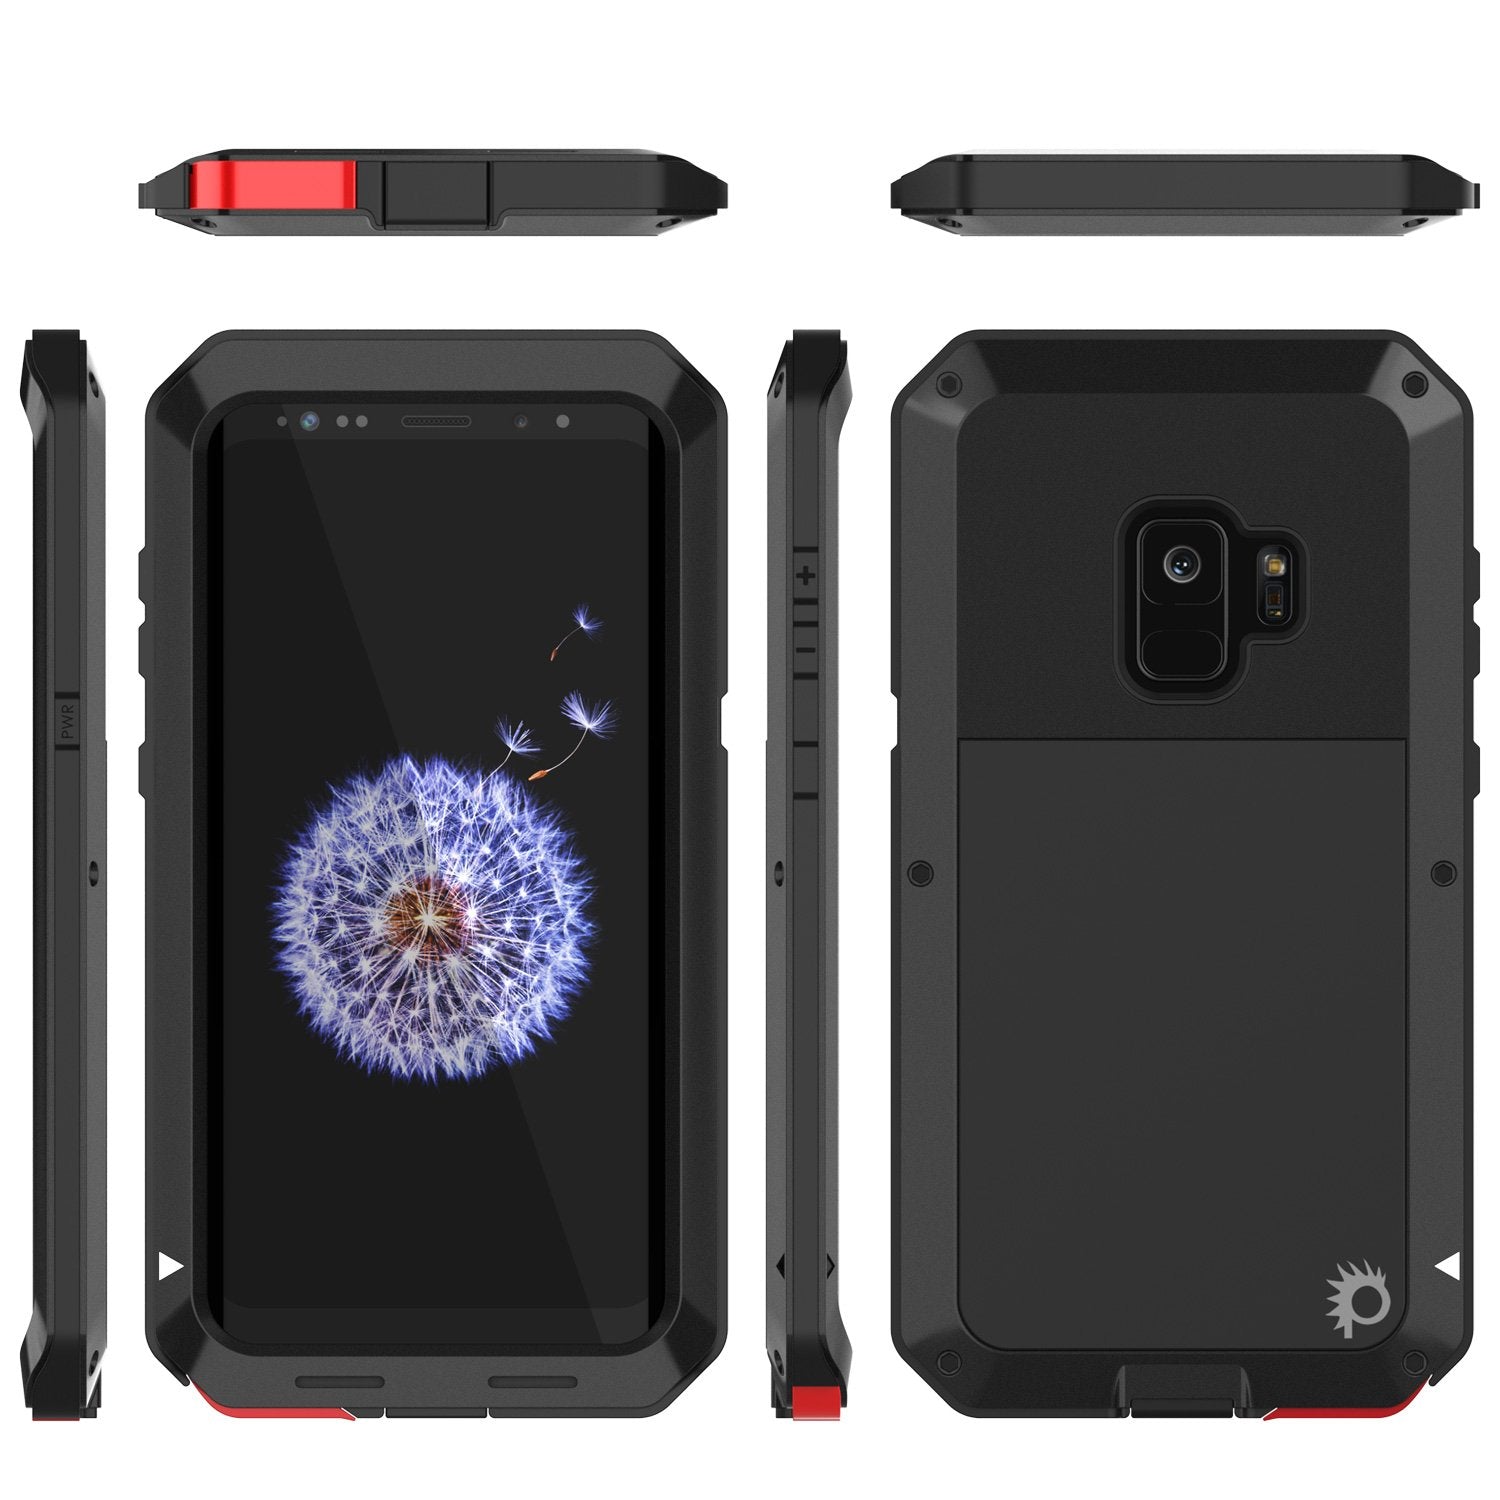 Galaxy S9 Metal Case, Heavy Duty Military Grade Rugged Armor Cover [shock proof] Hybrid Full Body Hard Aluminum & TPU Design [non slip] W/ Prime Drop Protection for Samsung Galaxy S9 [Black]